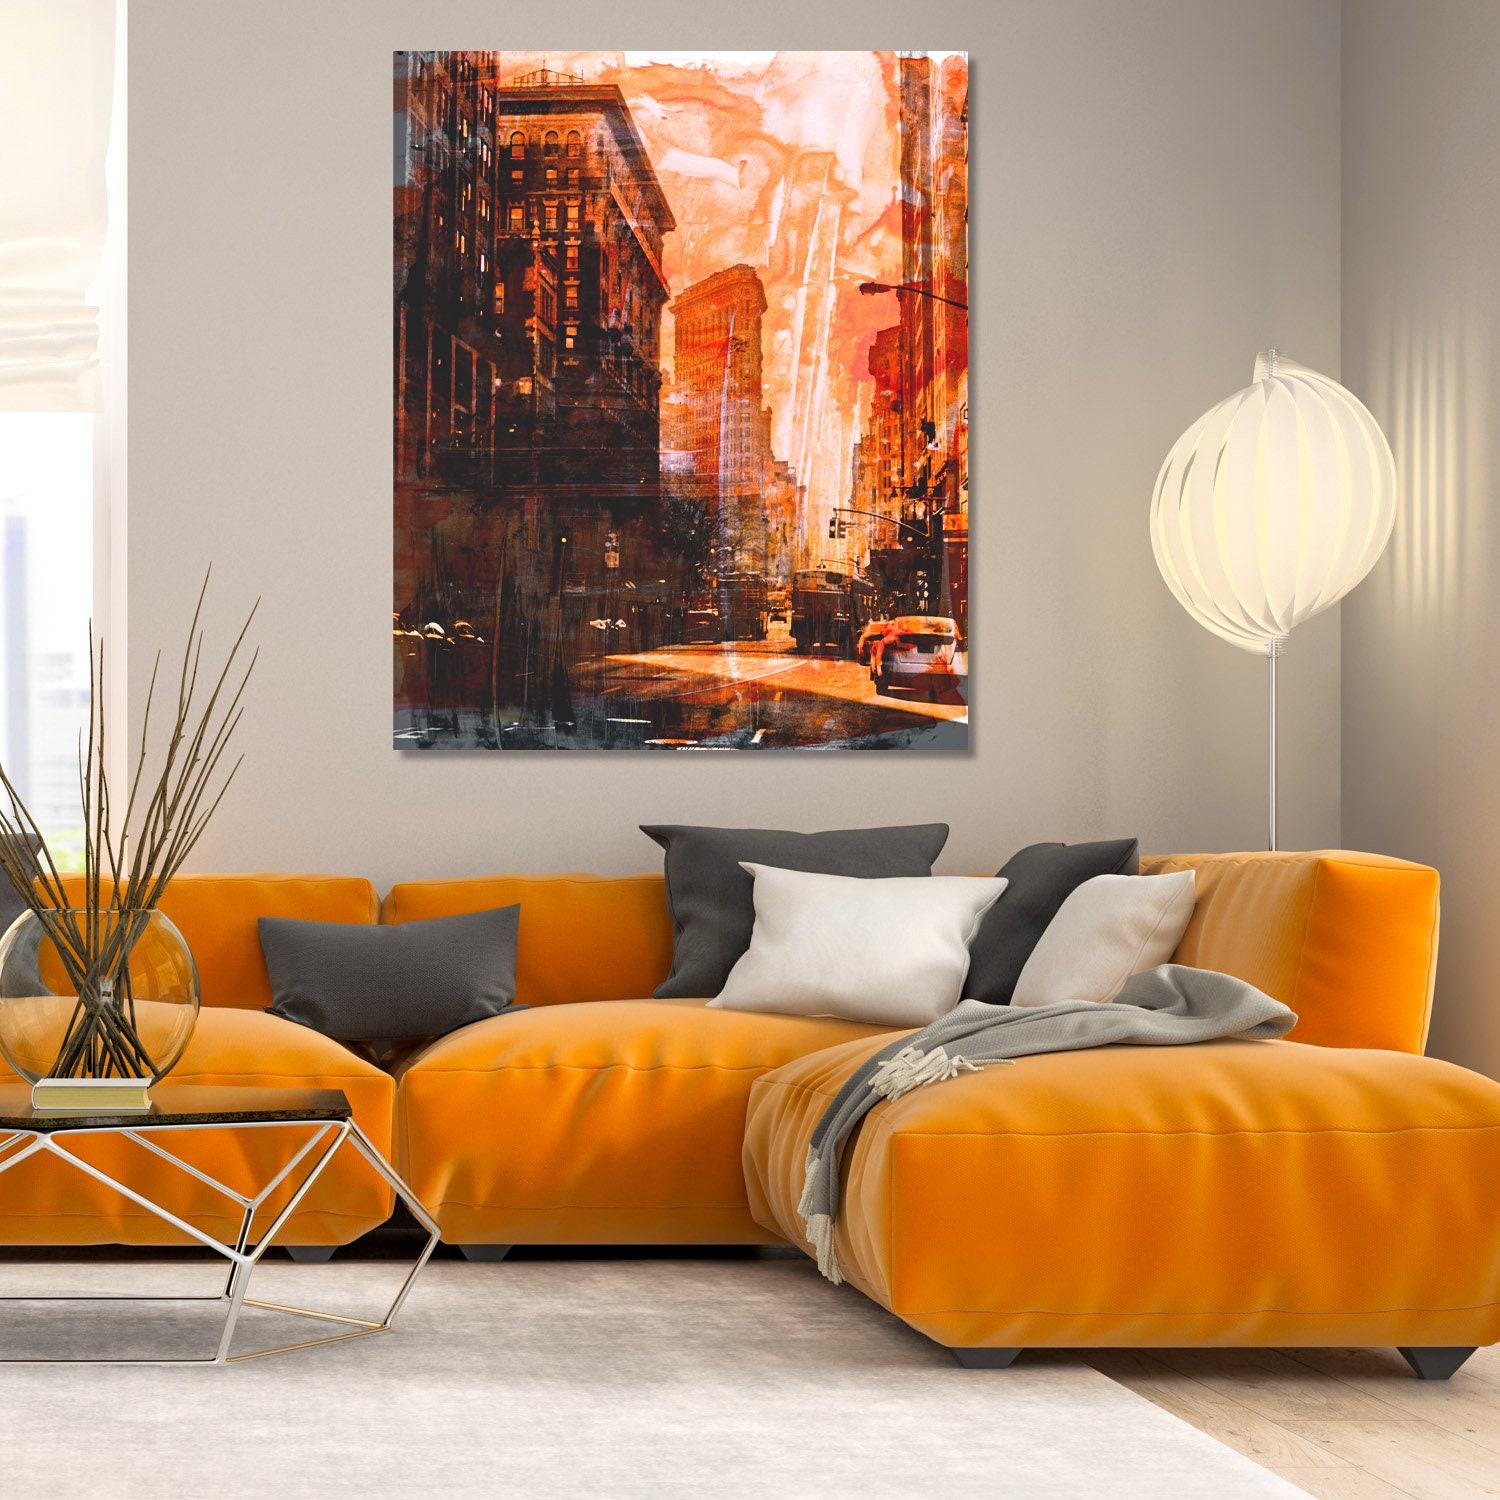 NY DOWNTOWN XV by Sven Pfrommer 120x90cm Artwork is Ready to - Etsy